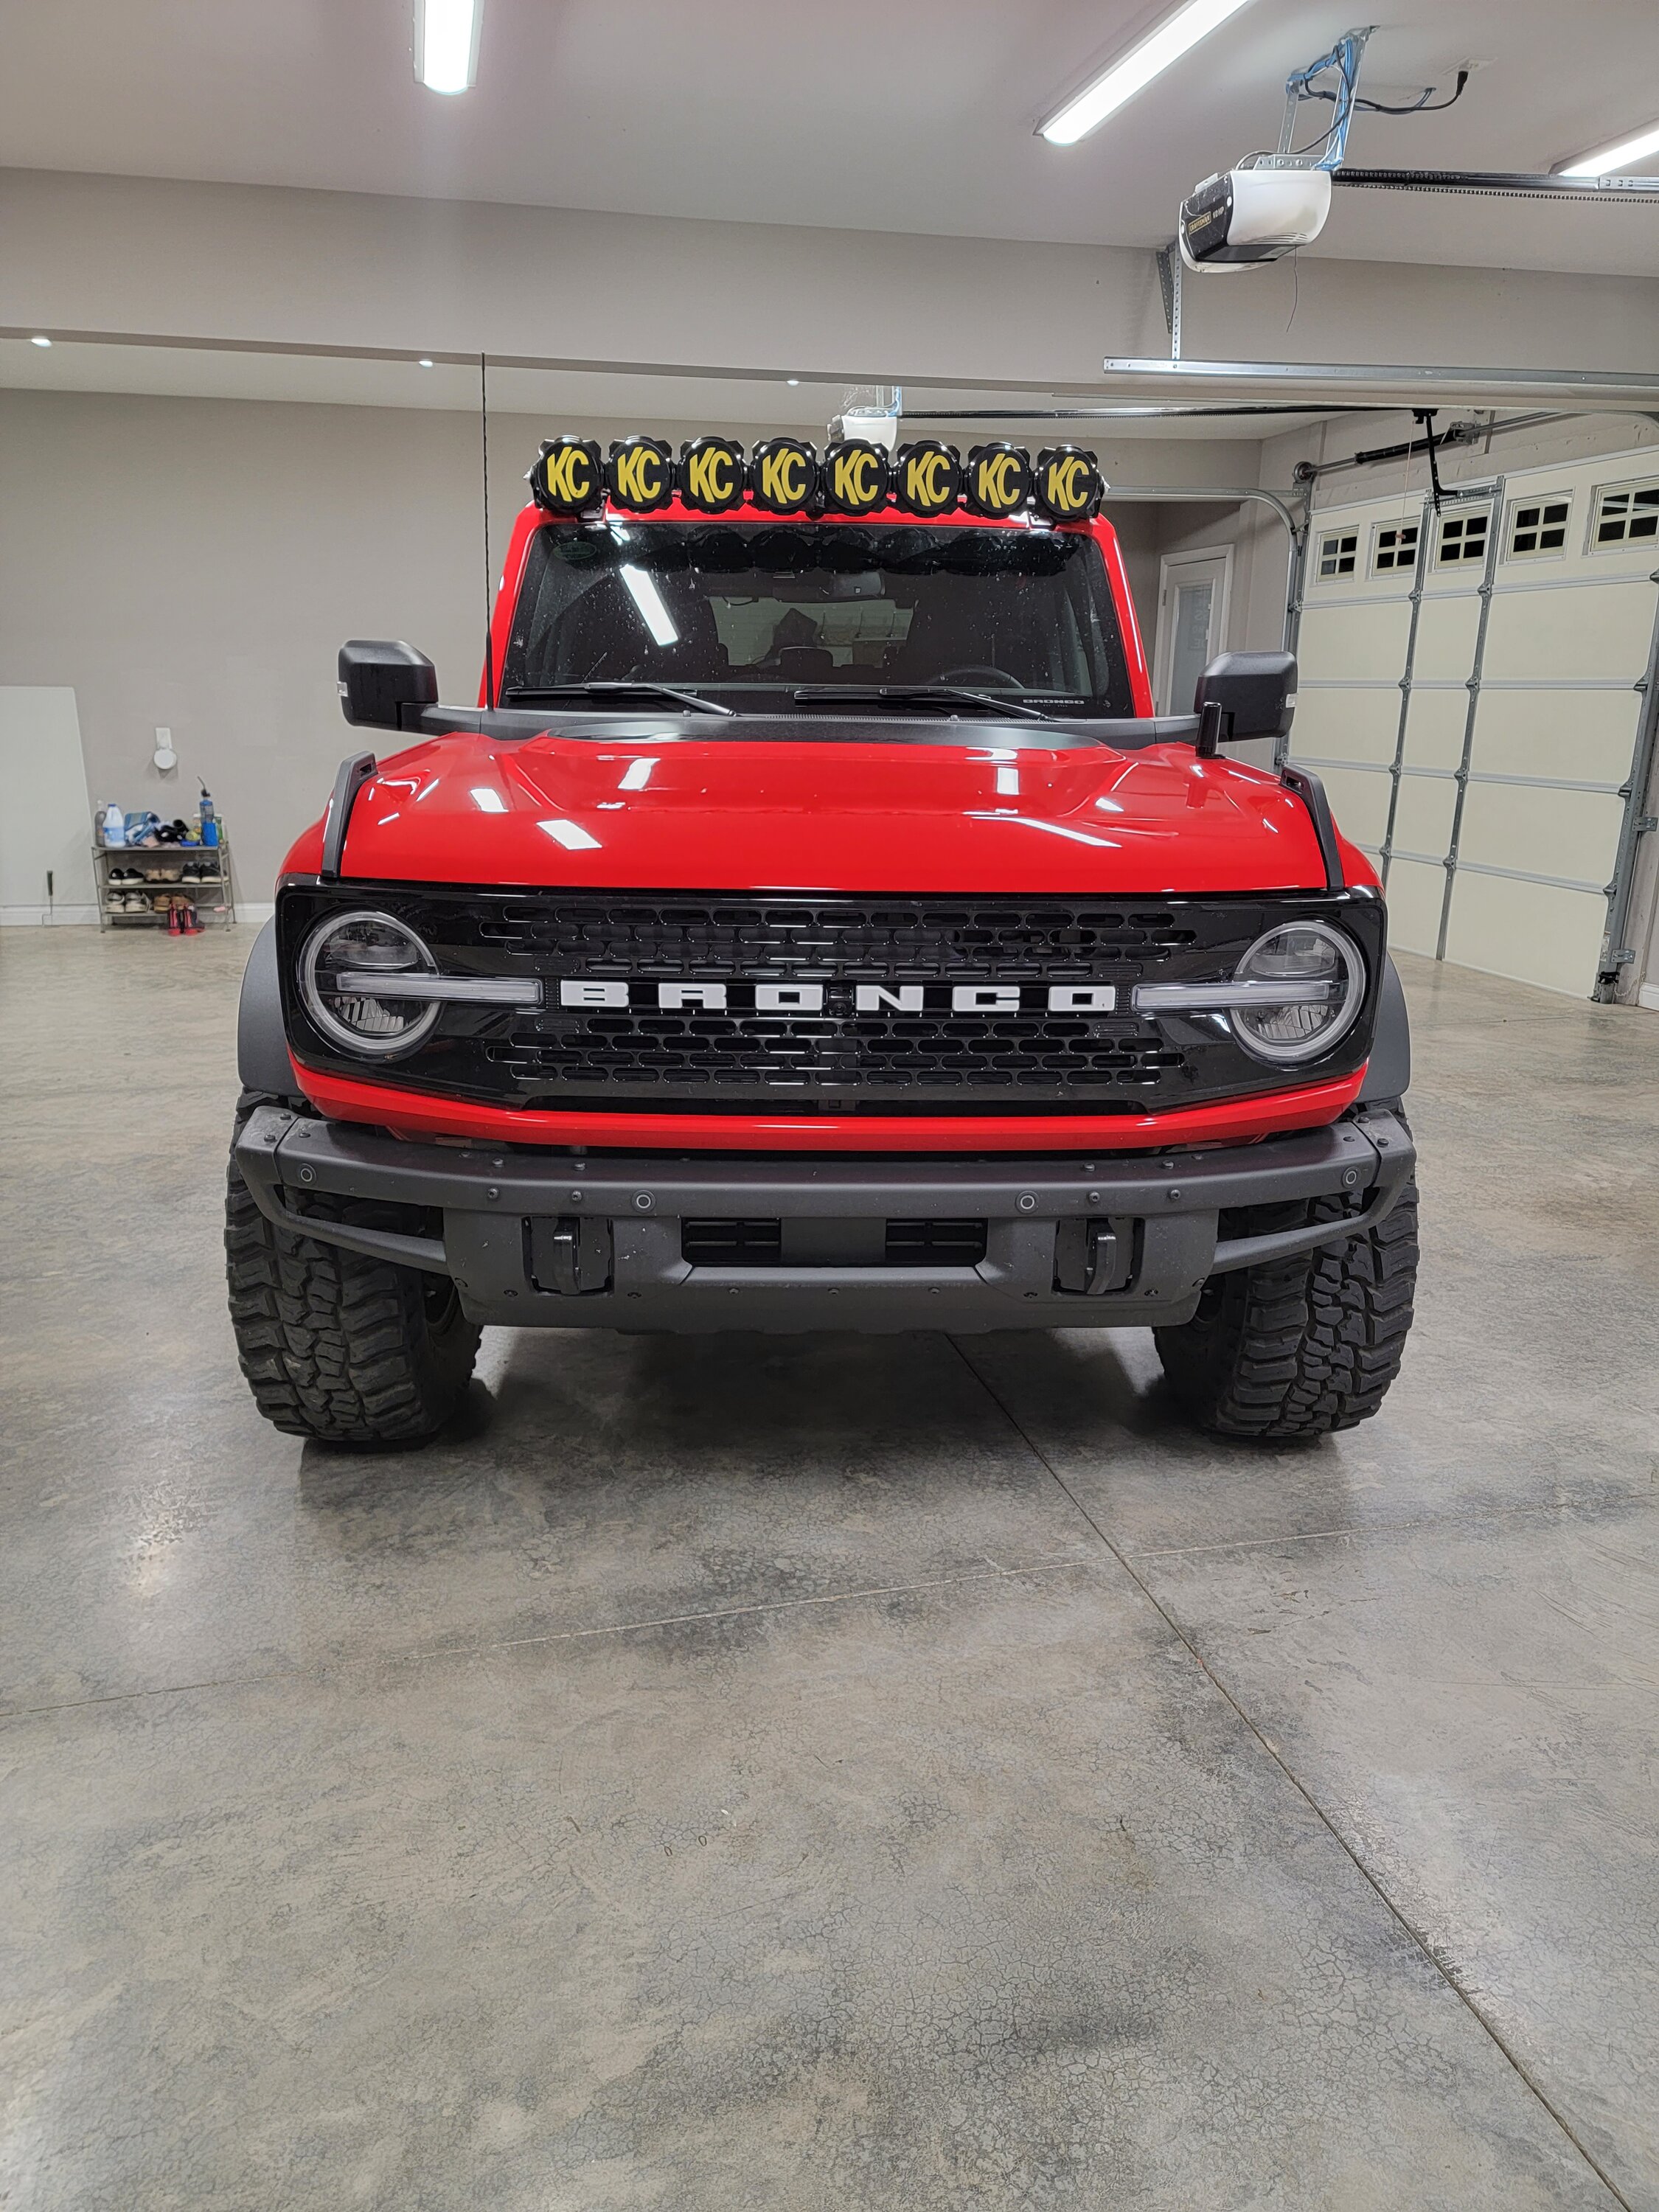 Ford Bronco Race Red Wildtrak Build in KY 20220610_223121